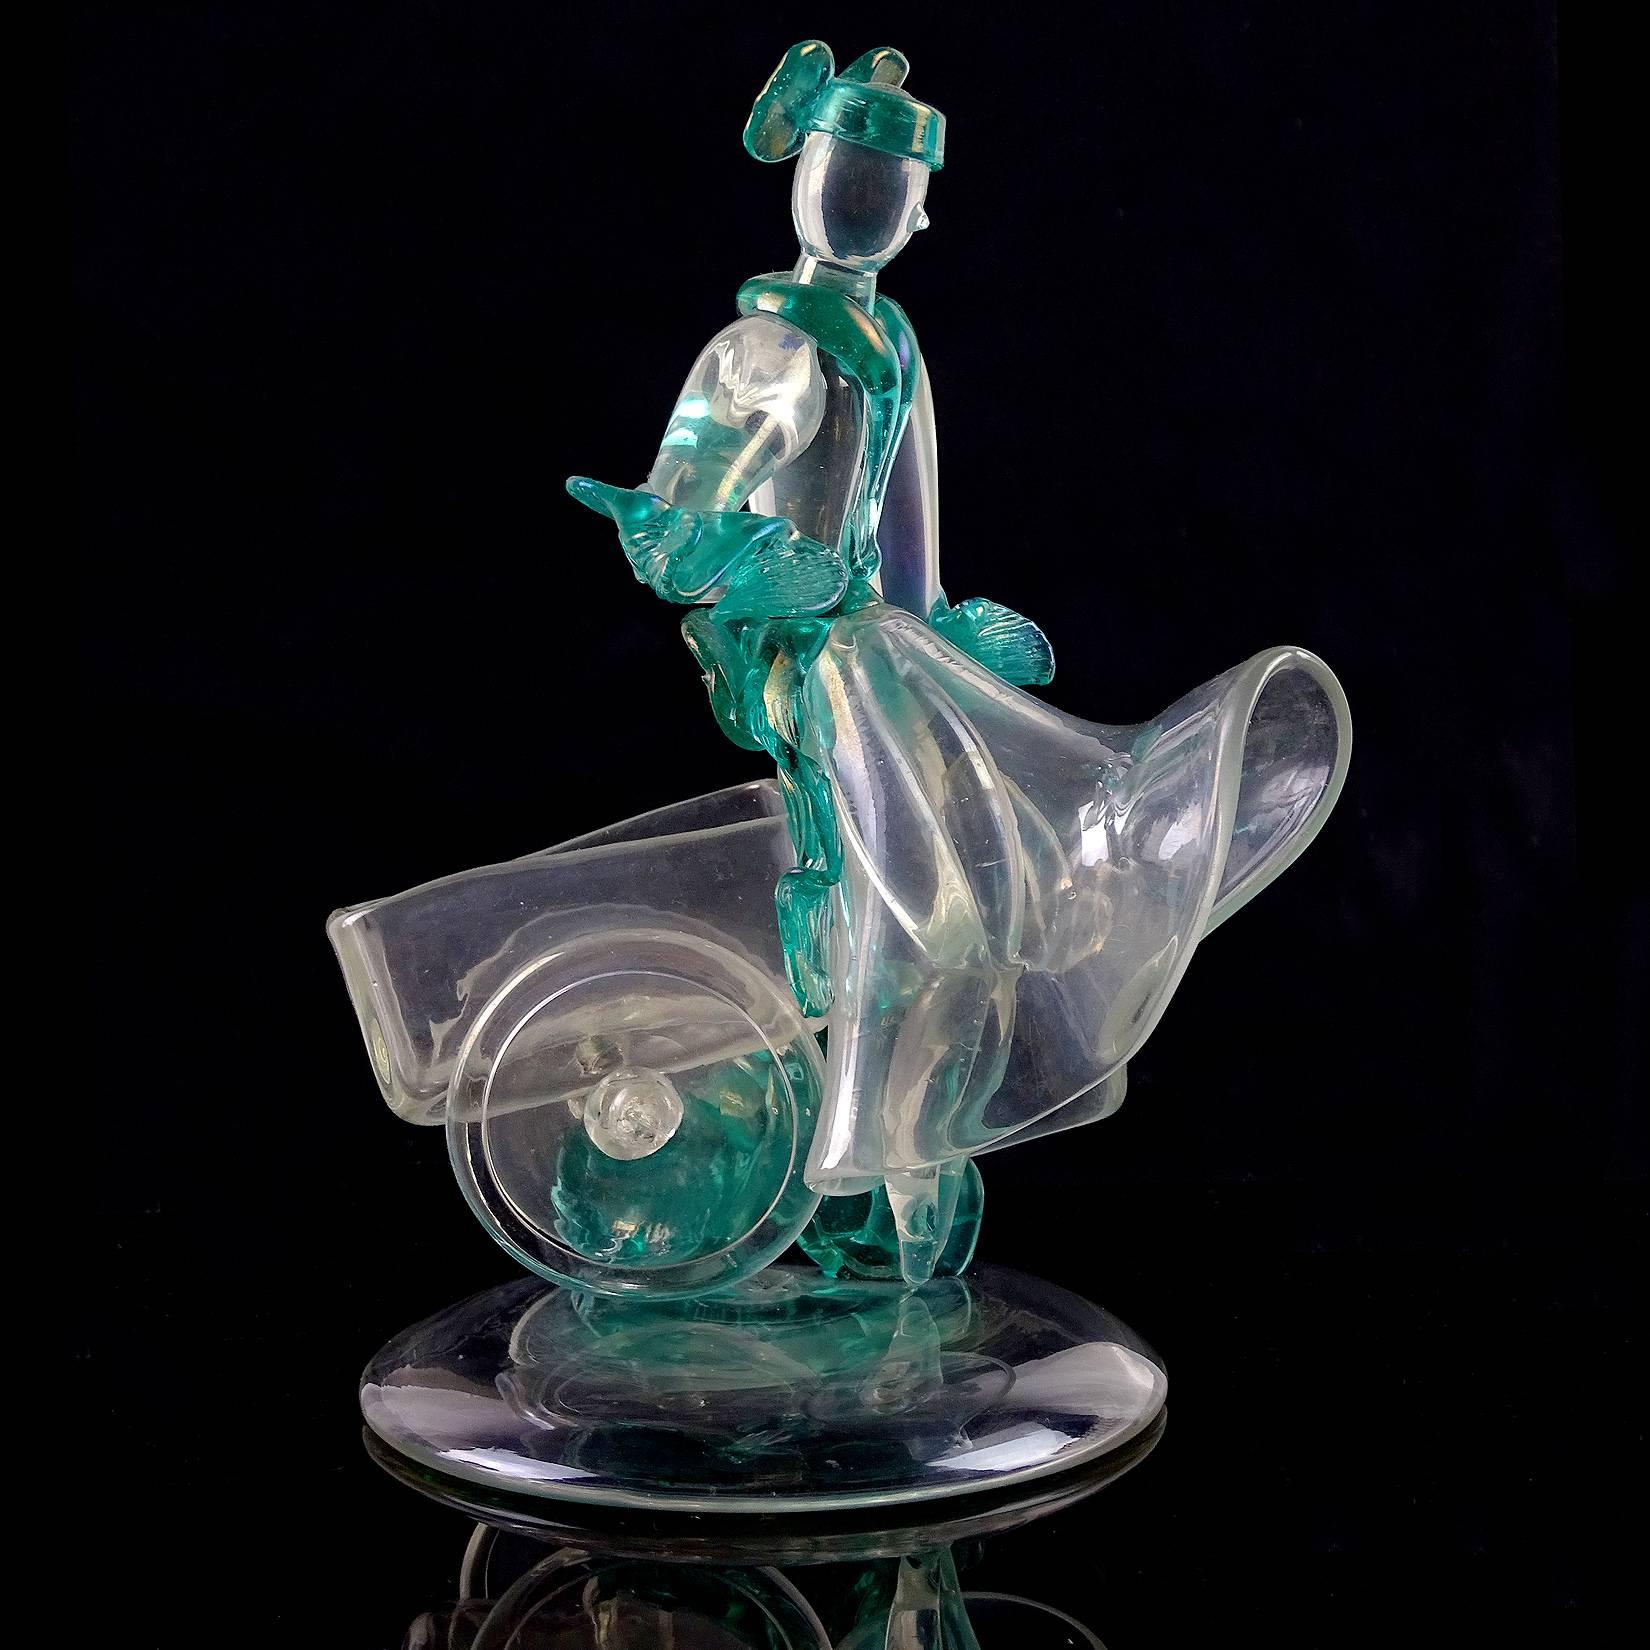 Rare and beautiful antique Murano hand blown iridescent Italian art glass woman figurine / sculpture, sitting on a cart. Documented to designer Flavio Poli for Seguso Vetri d'Arte, circa 1930s. Her costume has green accents throughout. Nicely